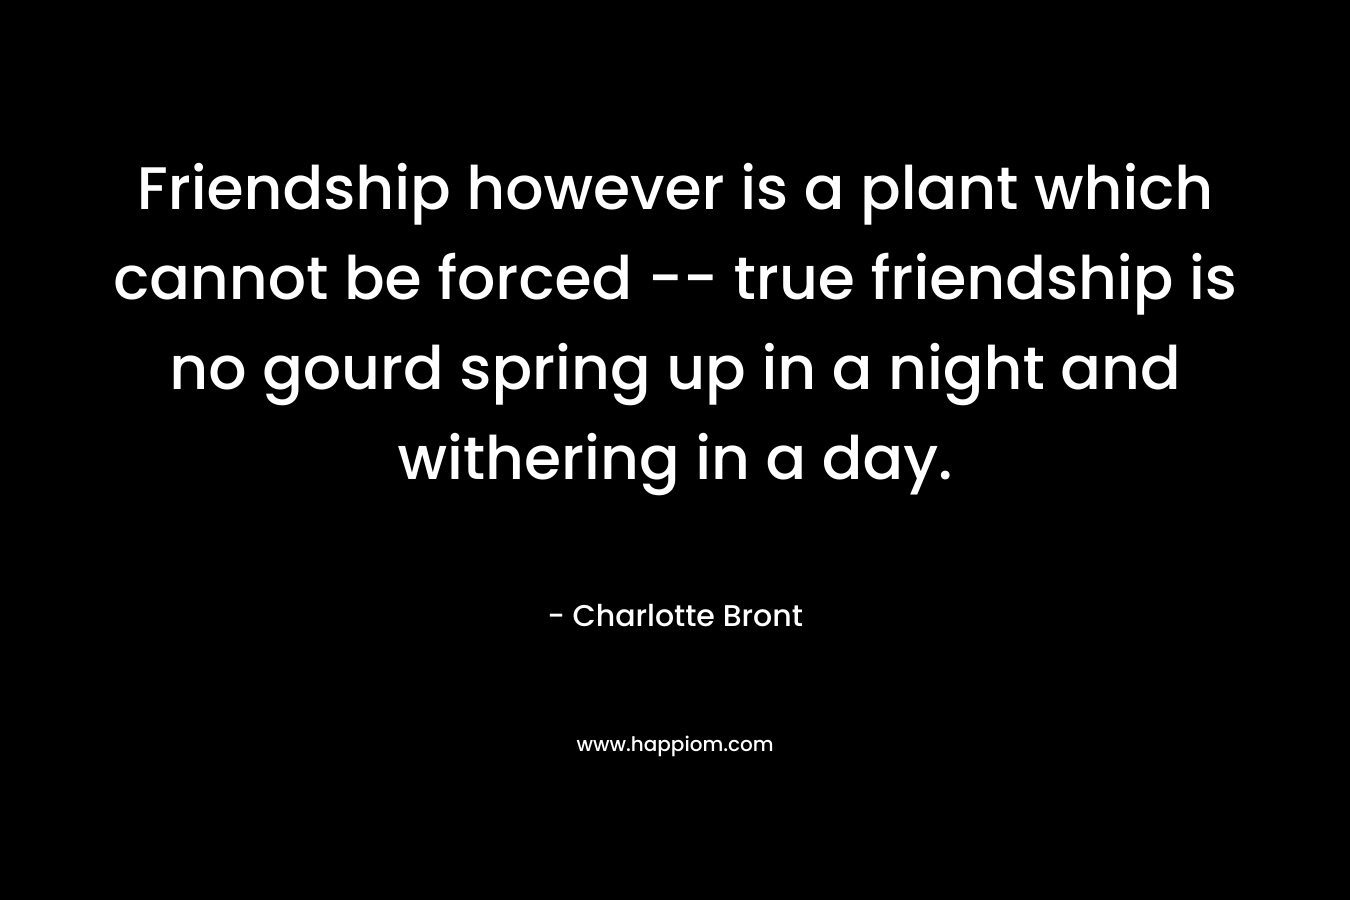 Friendship however is a plant which cannot be forced -- true friendship is no gourd spring up in a night and withering in a day.